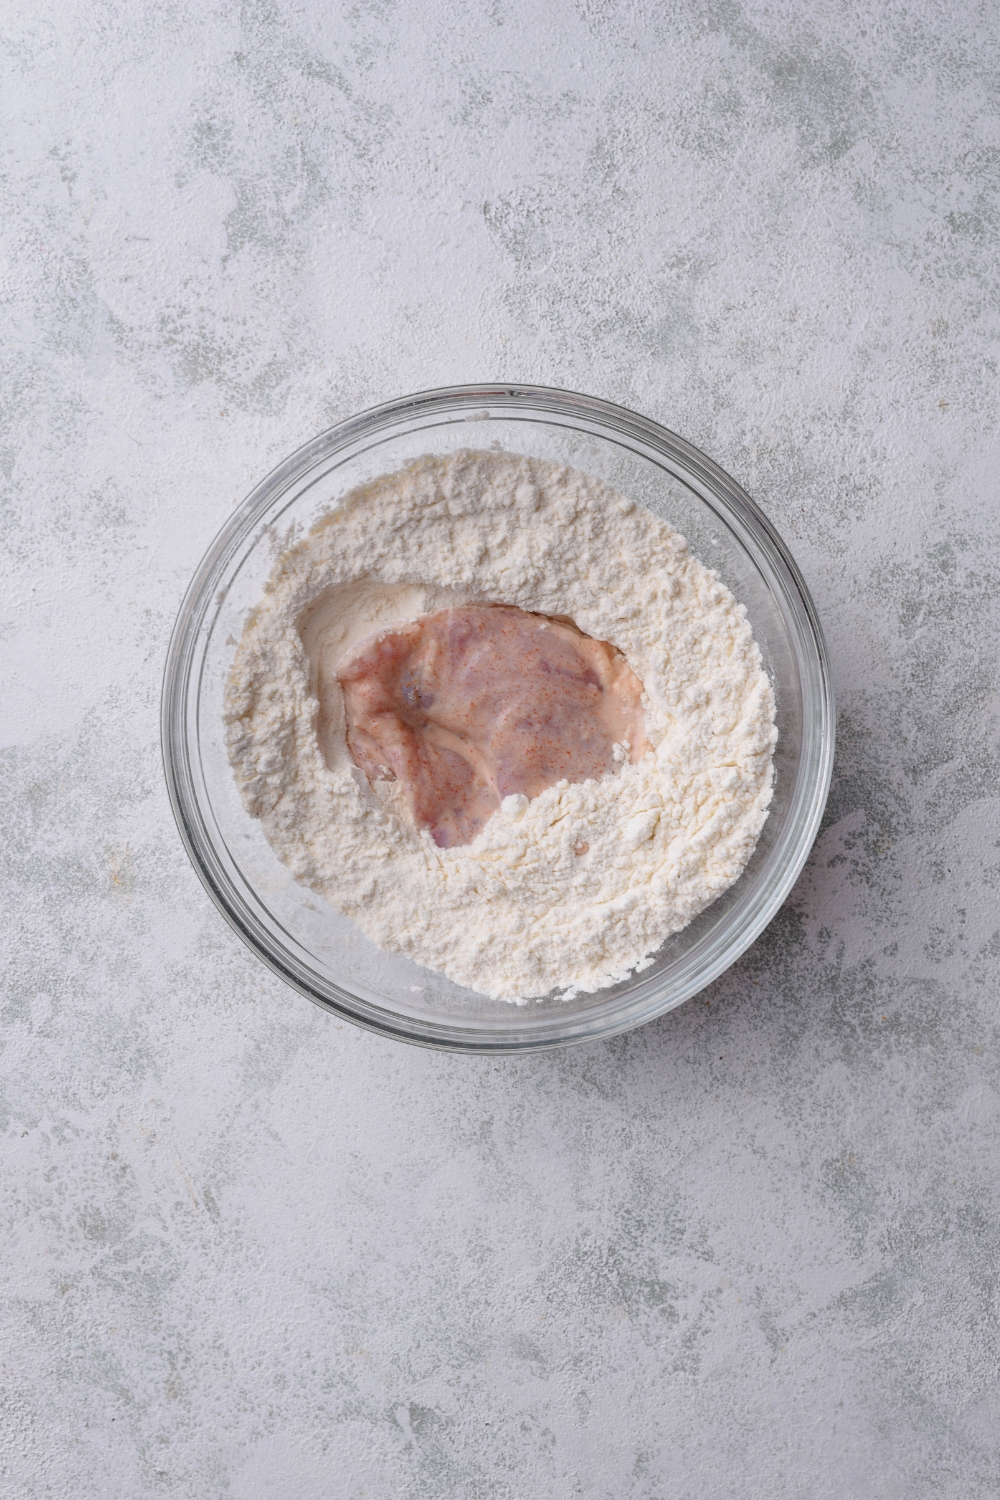 A bowl filled with a flour mixture and a piece of raw chicken.